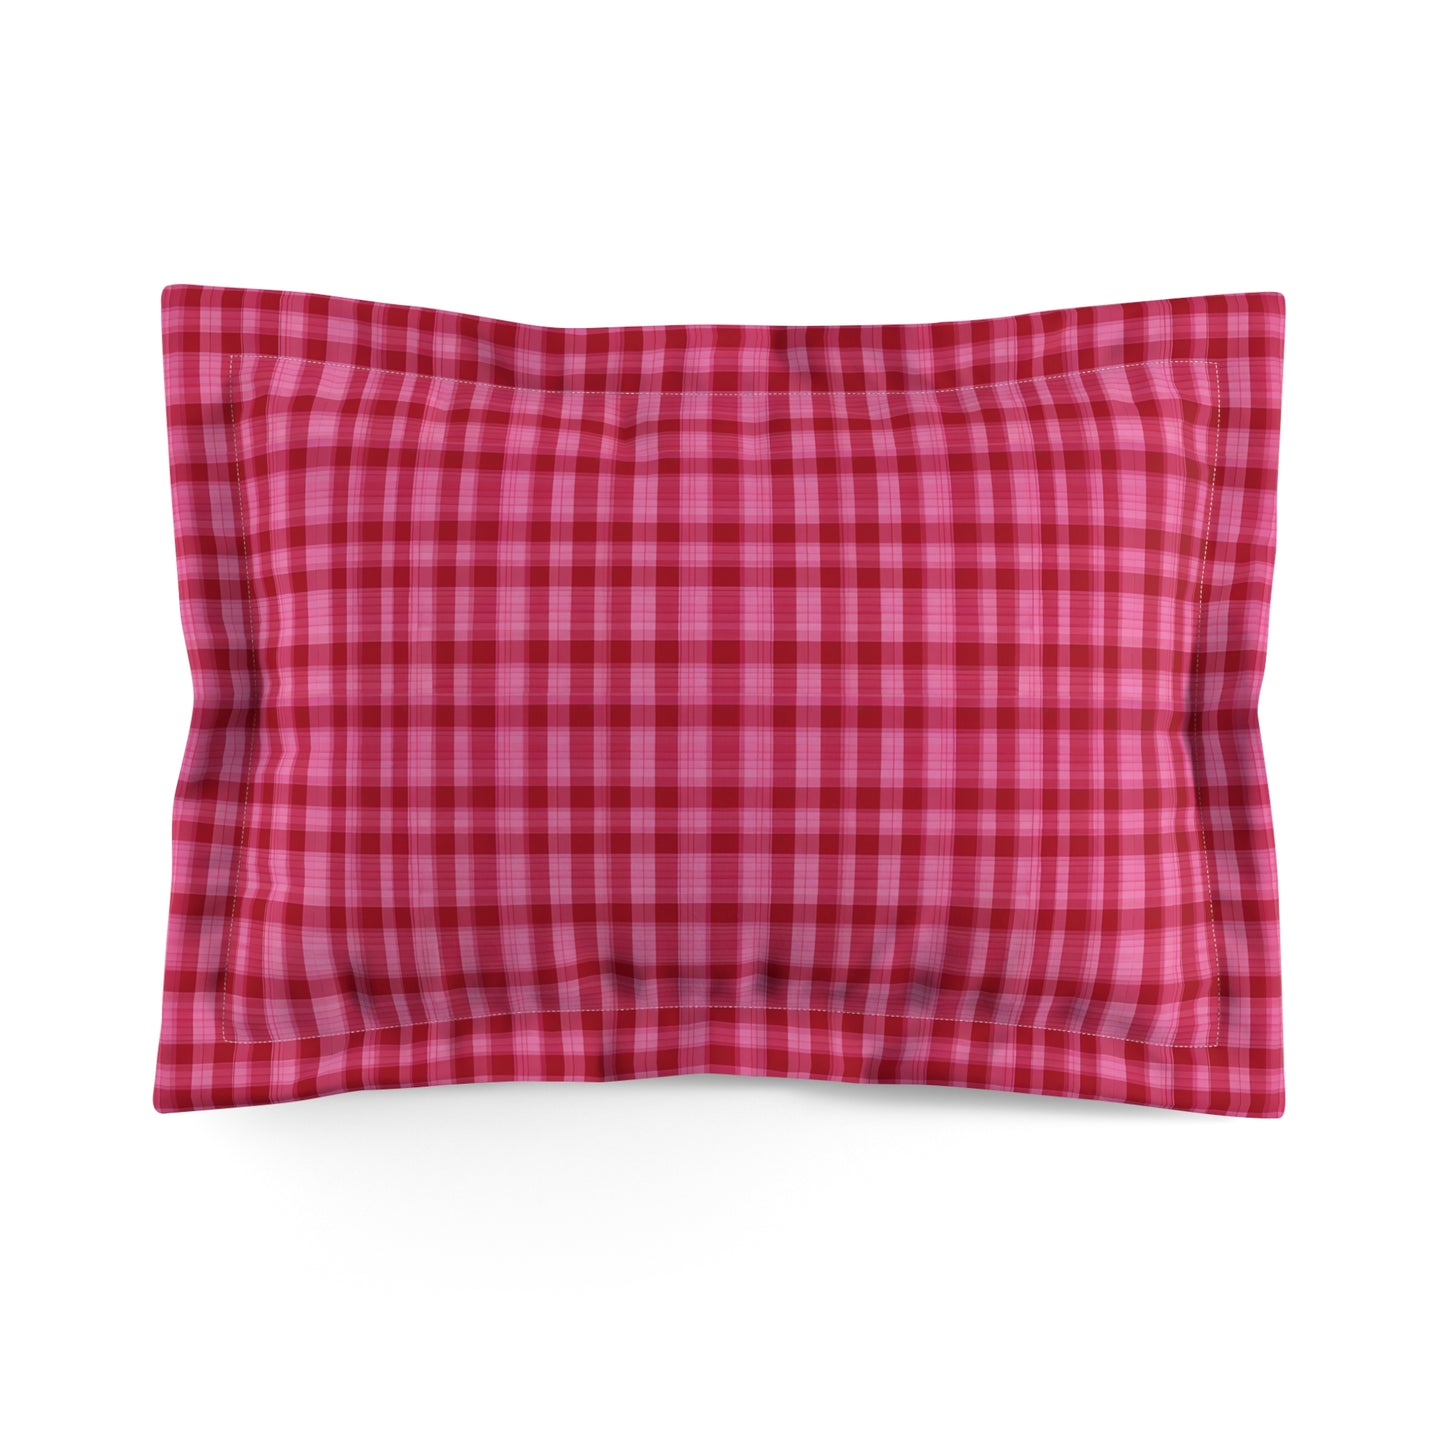 Pink And Red Tight Plaid Pillow Sham